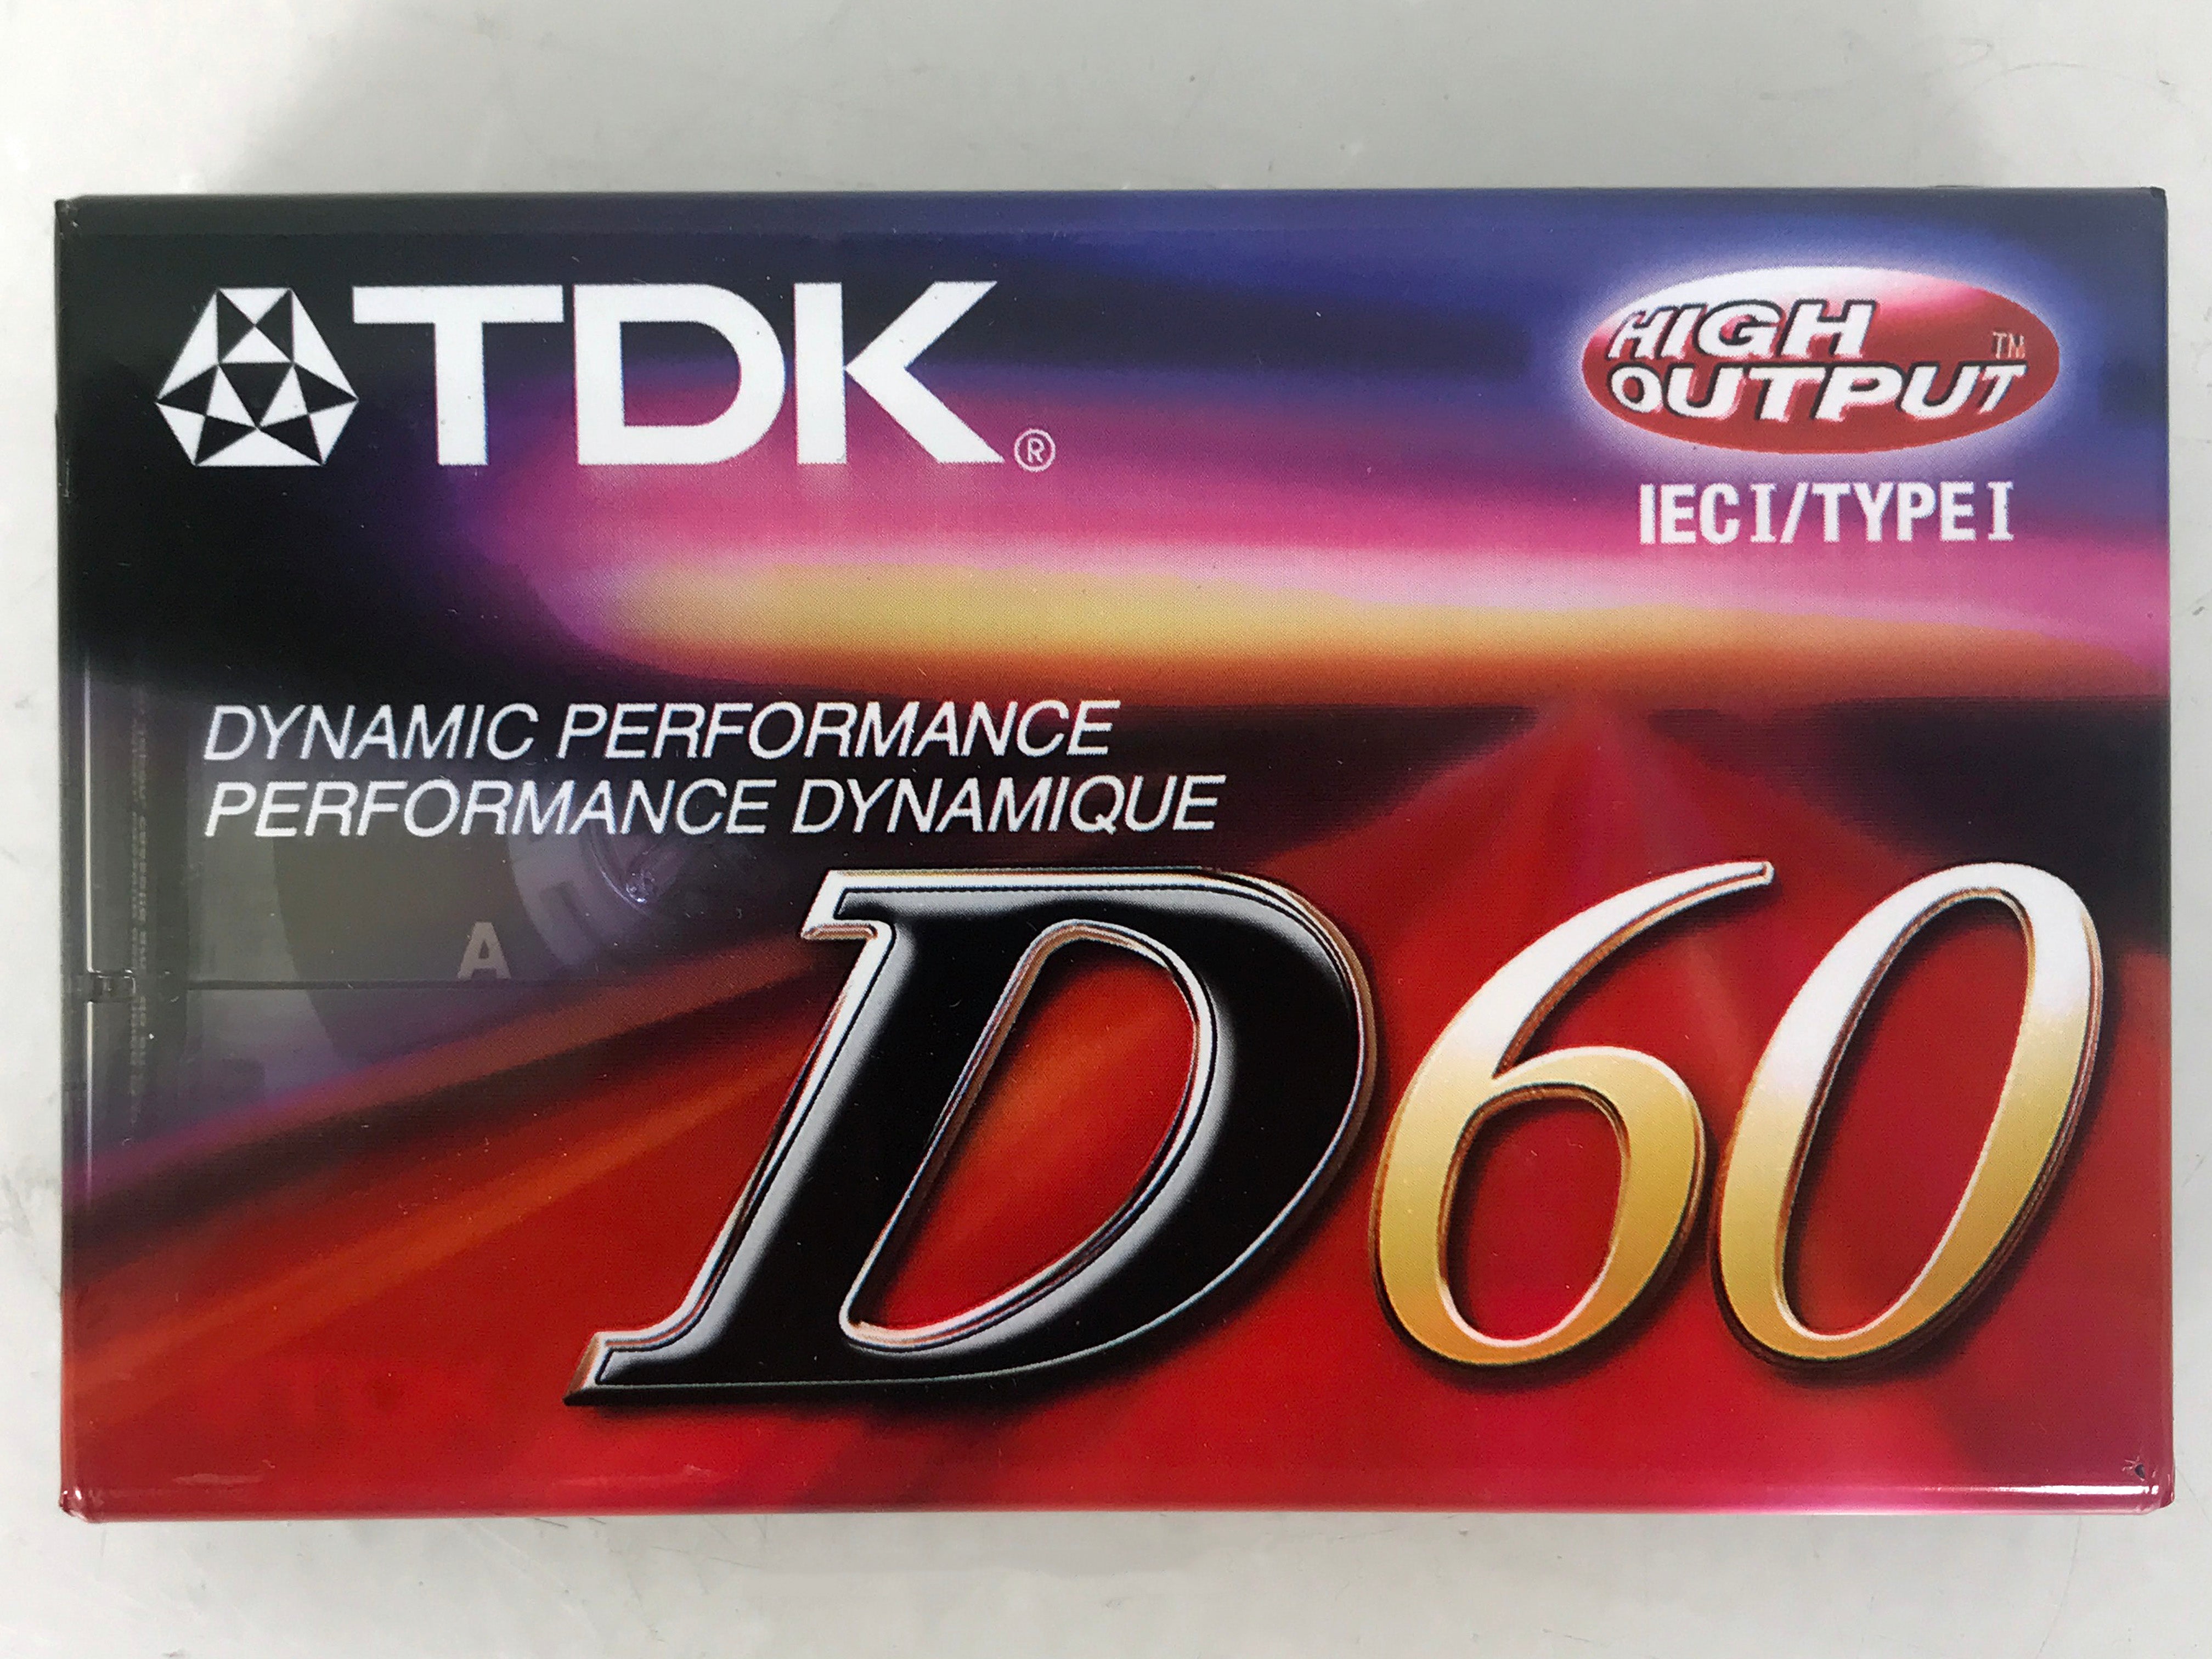 TDK D60 High Output Audio Cassette Tapes IECI/Type 1